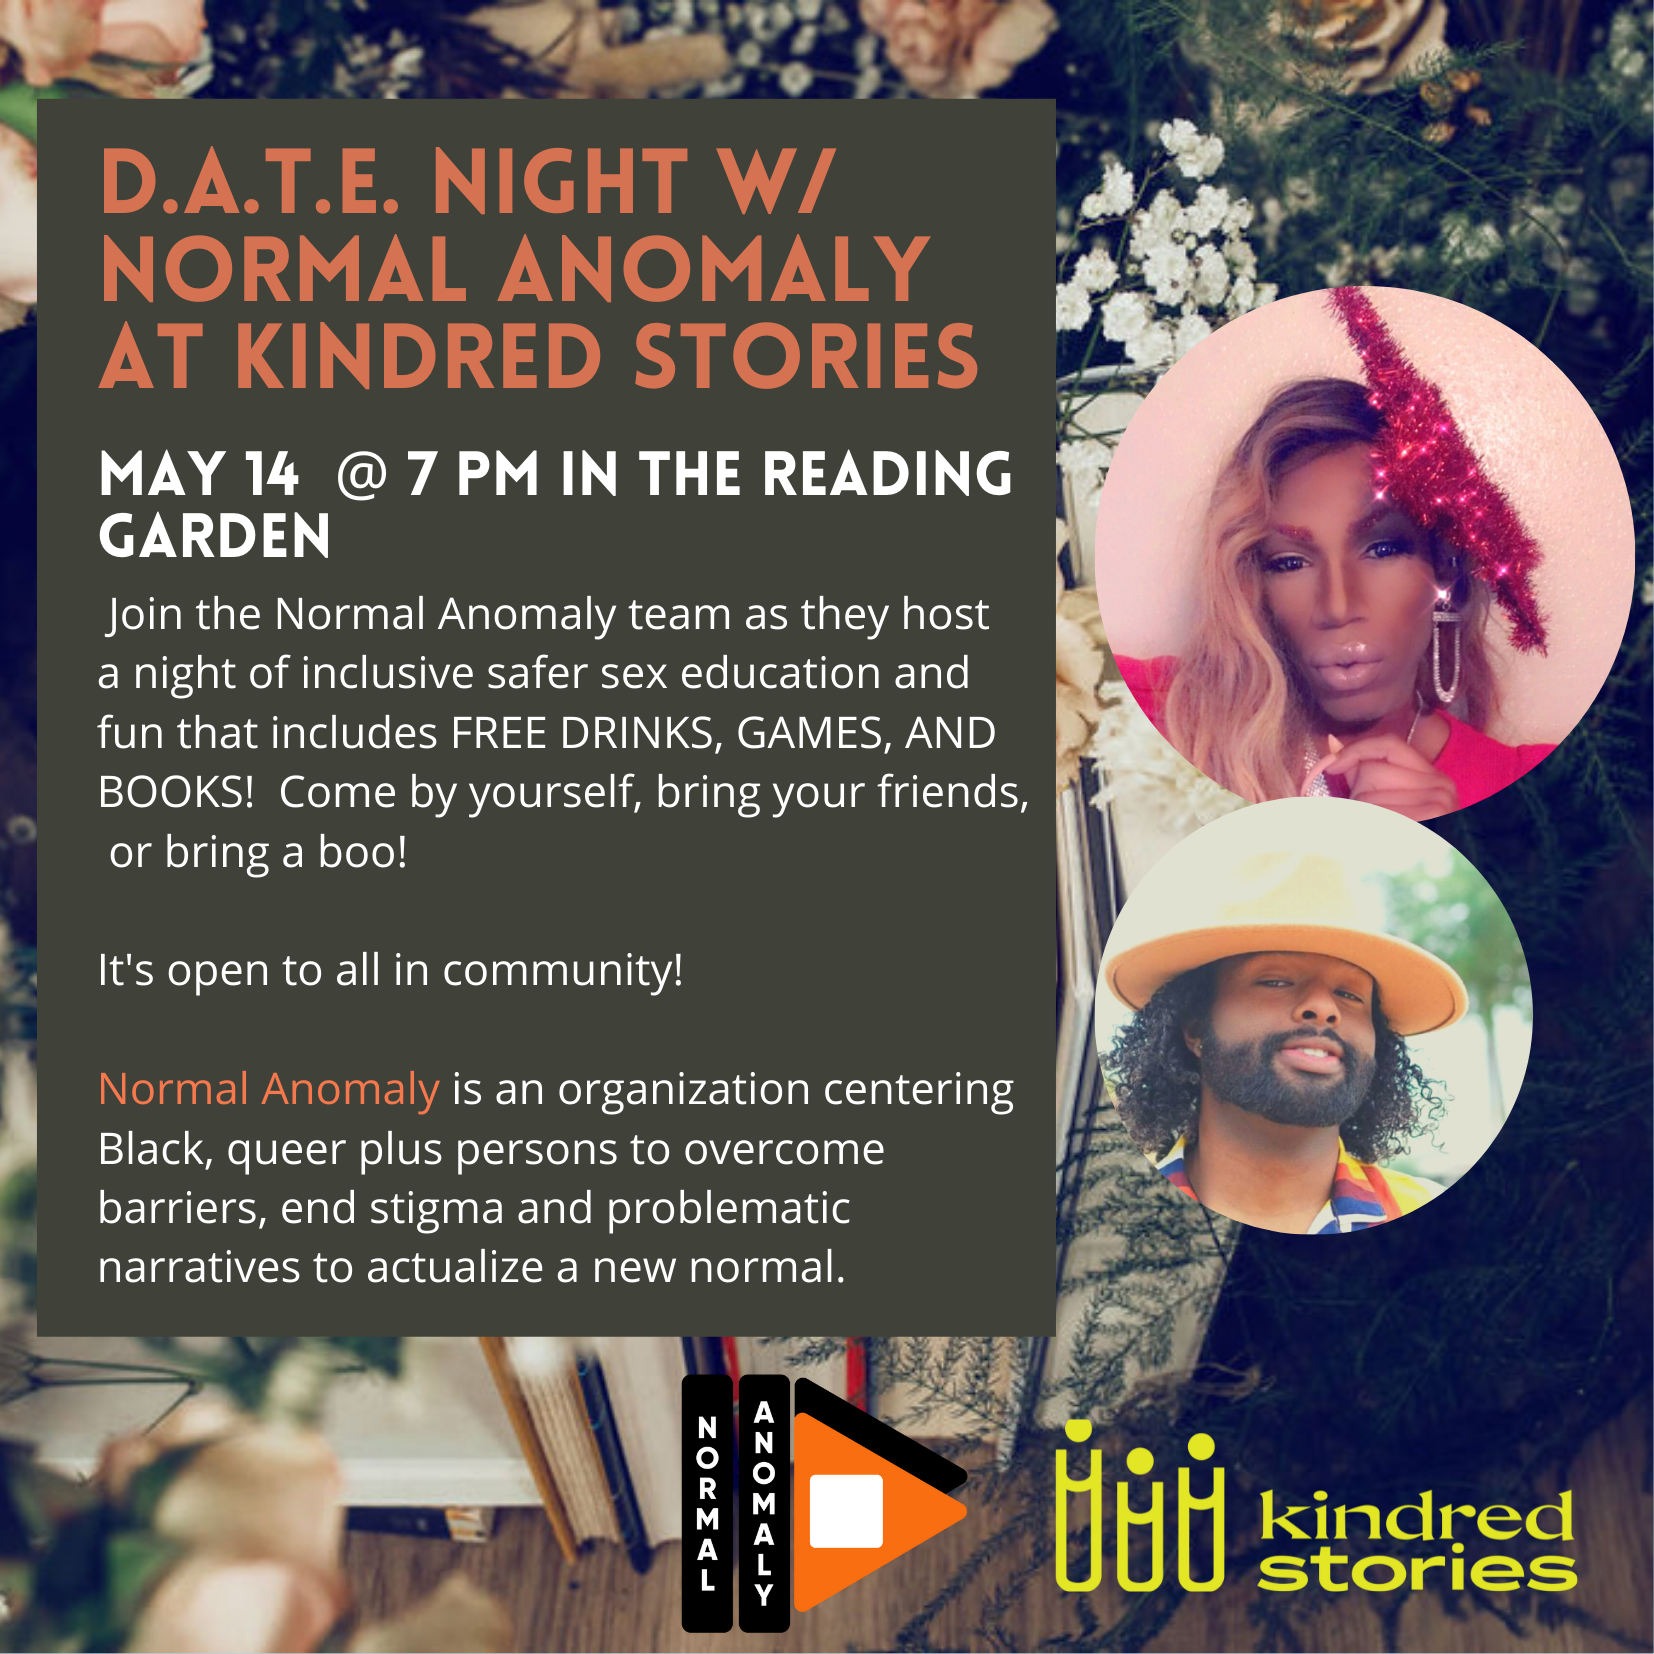 D.A.T.E. Night May 14 at Kindred Stories with Normal Anamoly